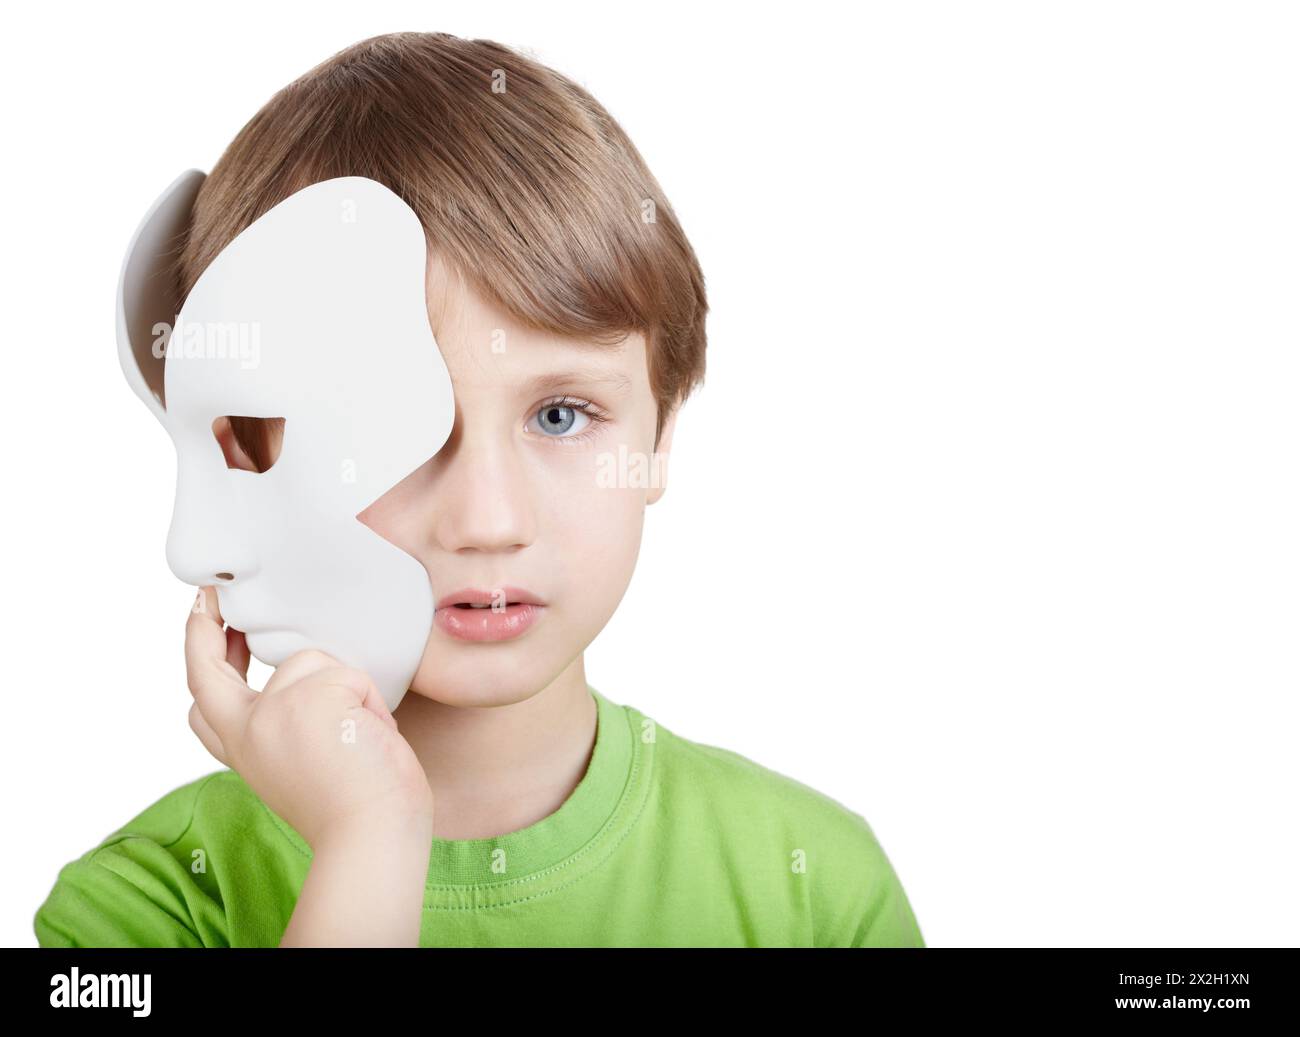 Little boy in the green t-shirt hides half of the face behind the theatrical mask Stock Photo